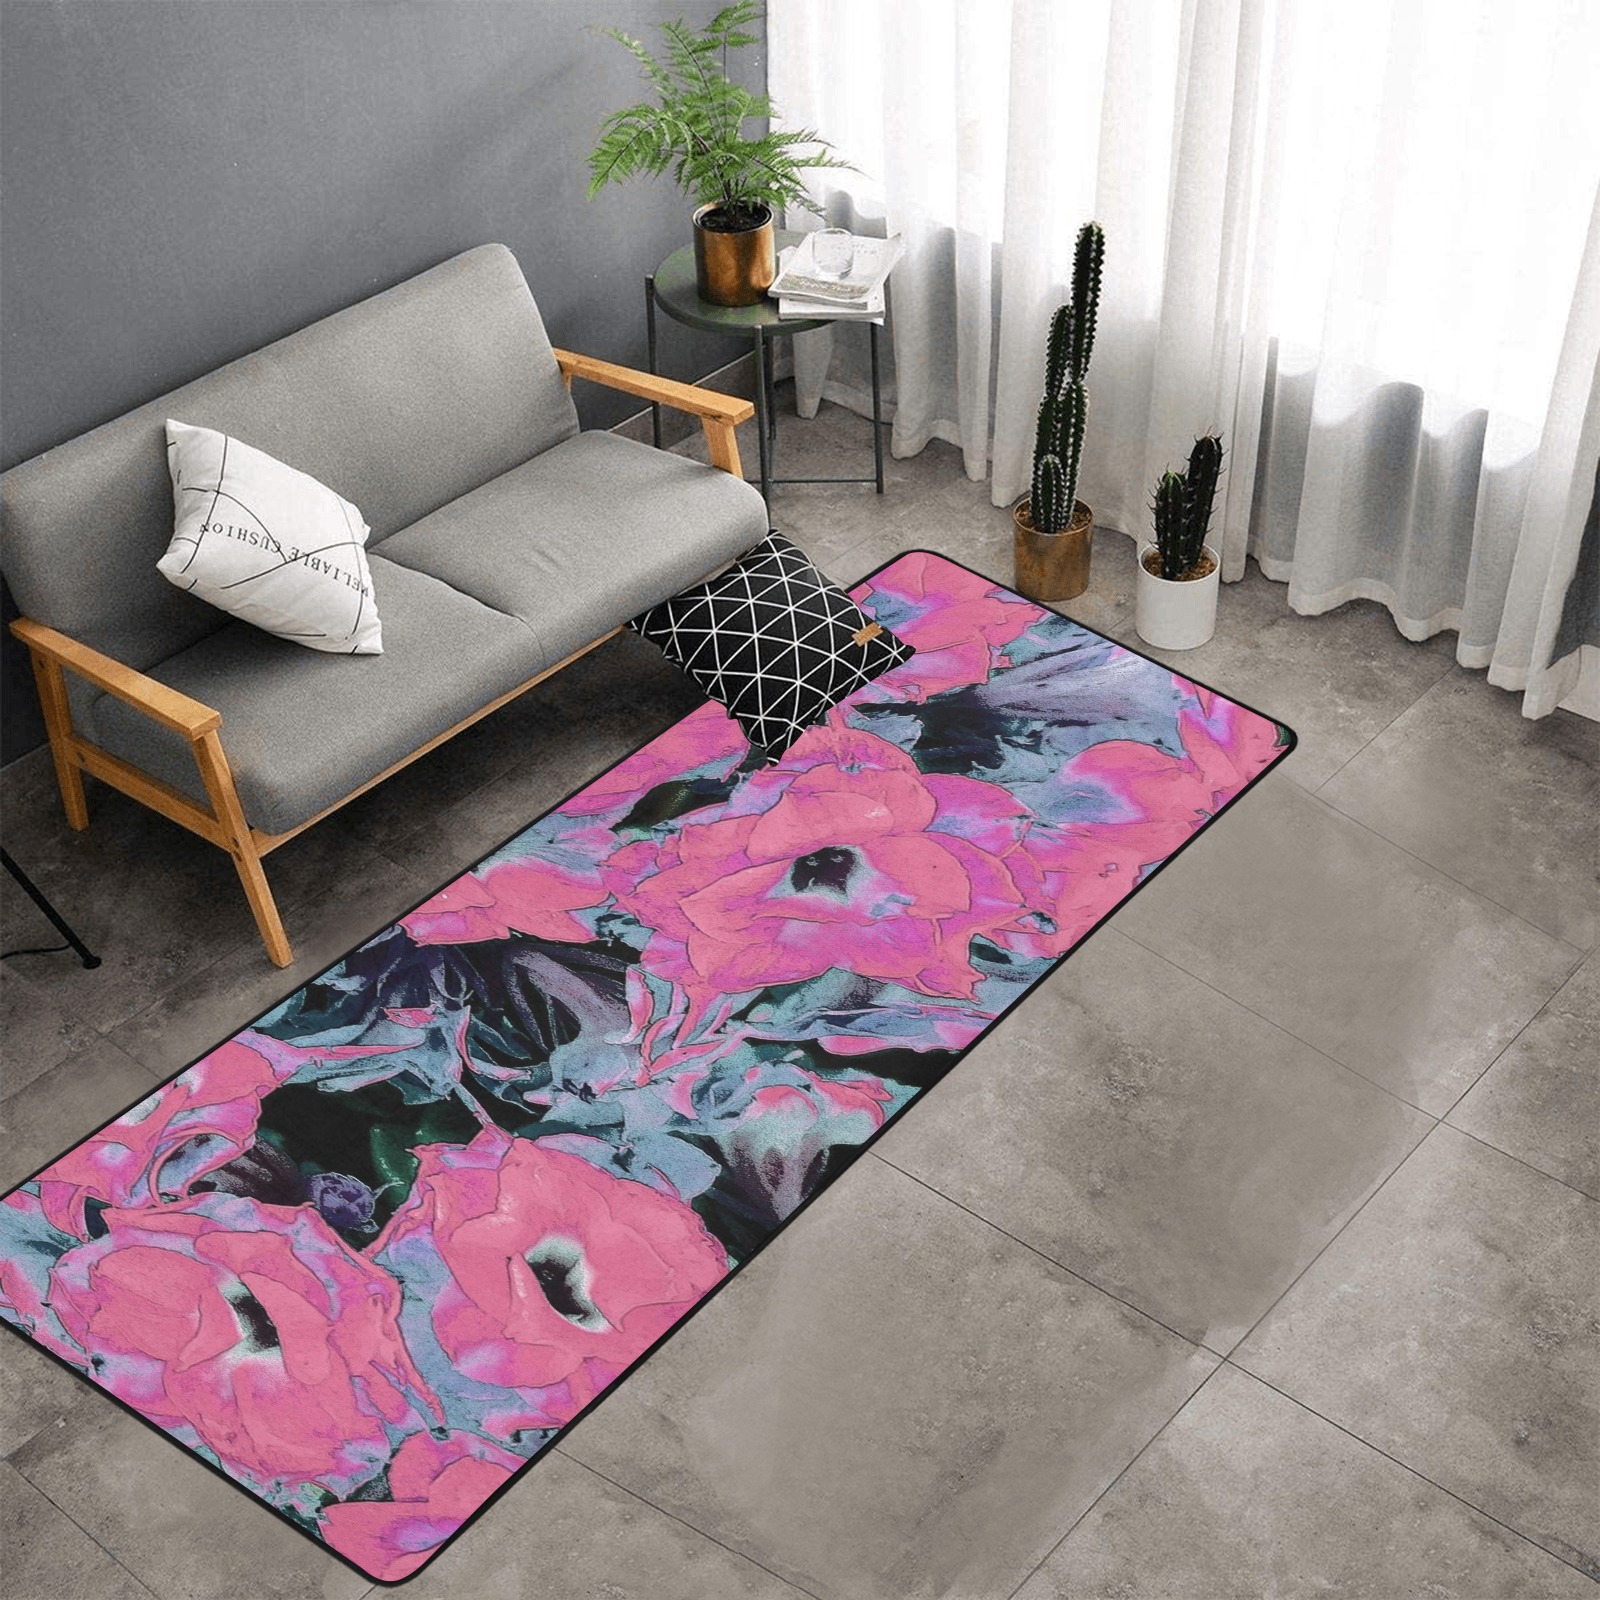 Rouge Kalanchoe Plant Area Rug with Black Binding 9'6''x3'3''